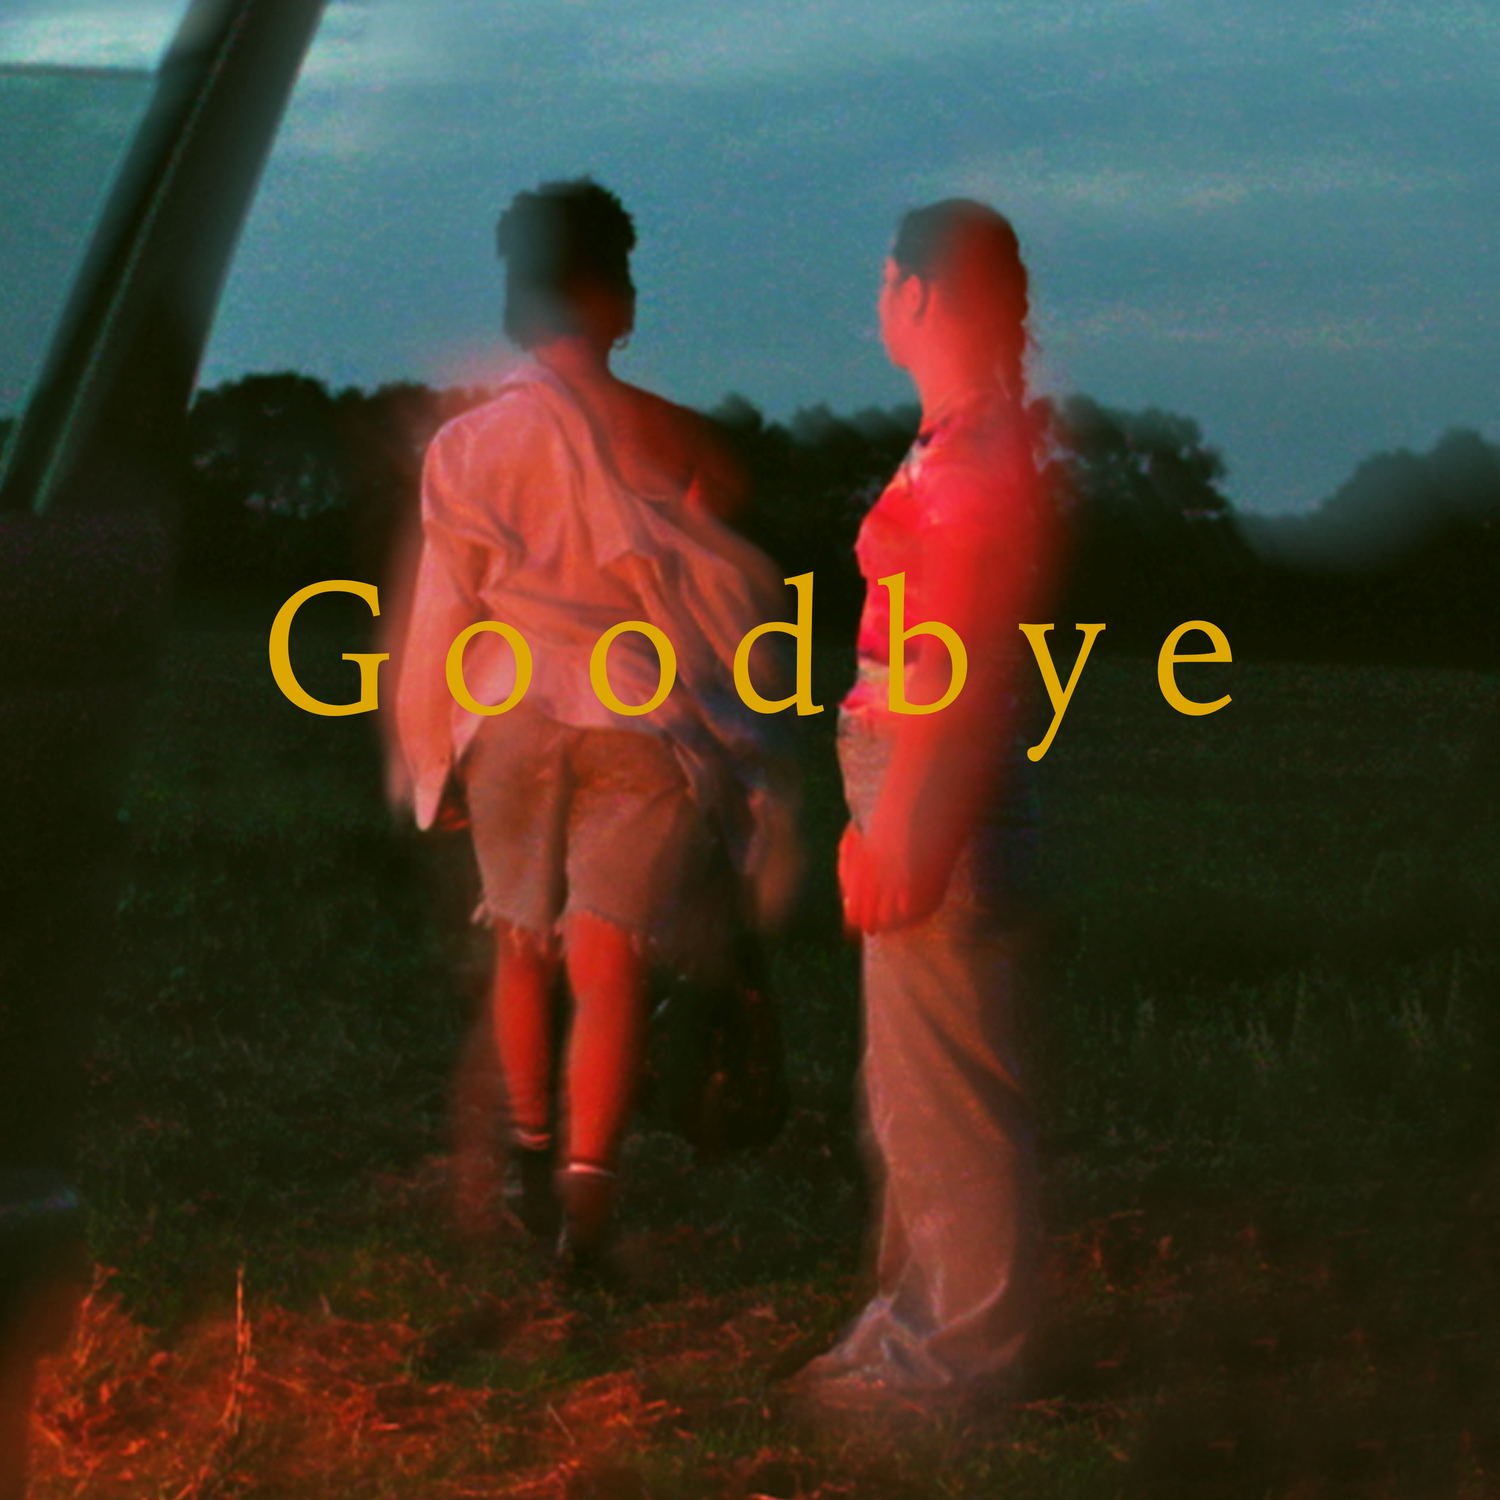 AVAION SPARES NO ANGST IN ‘GOODBYE’ WITH SAM WELCH